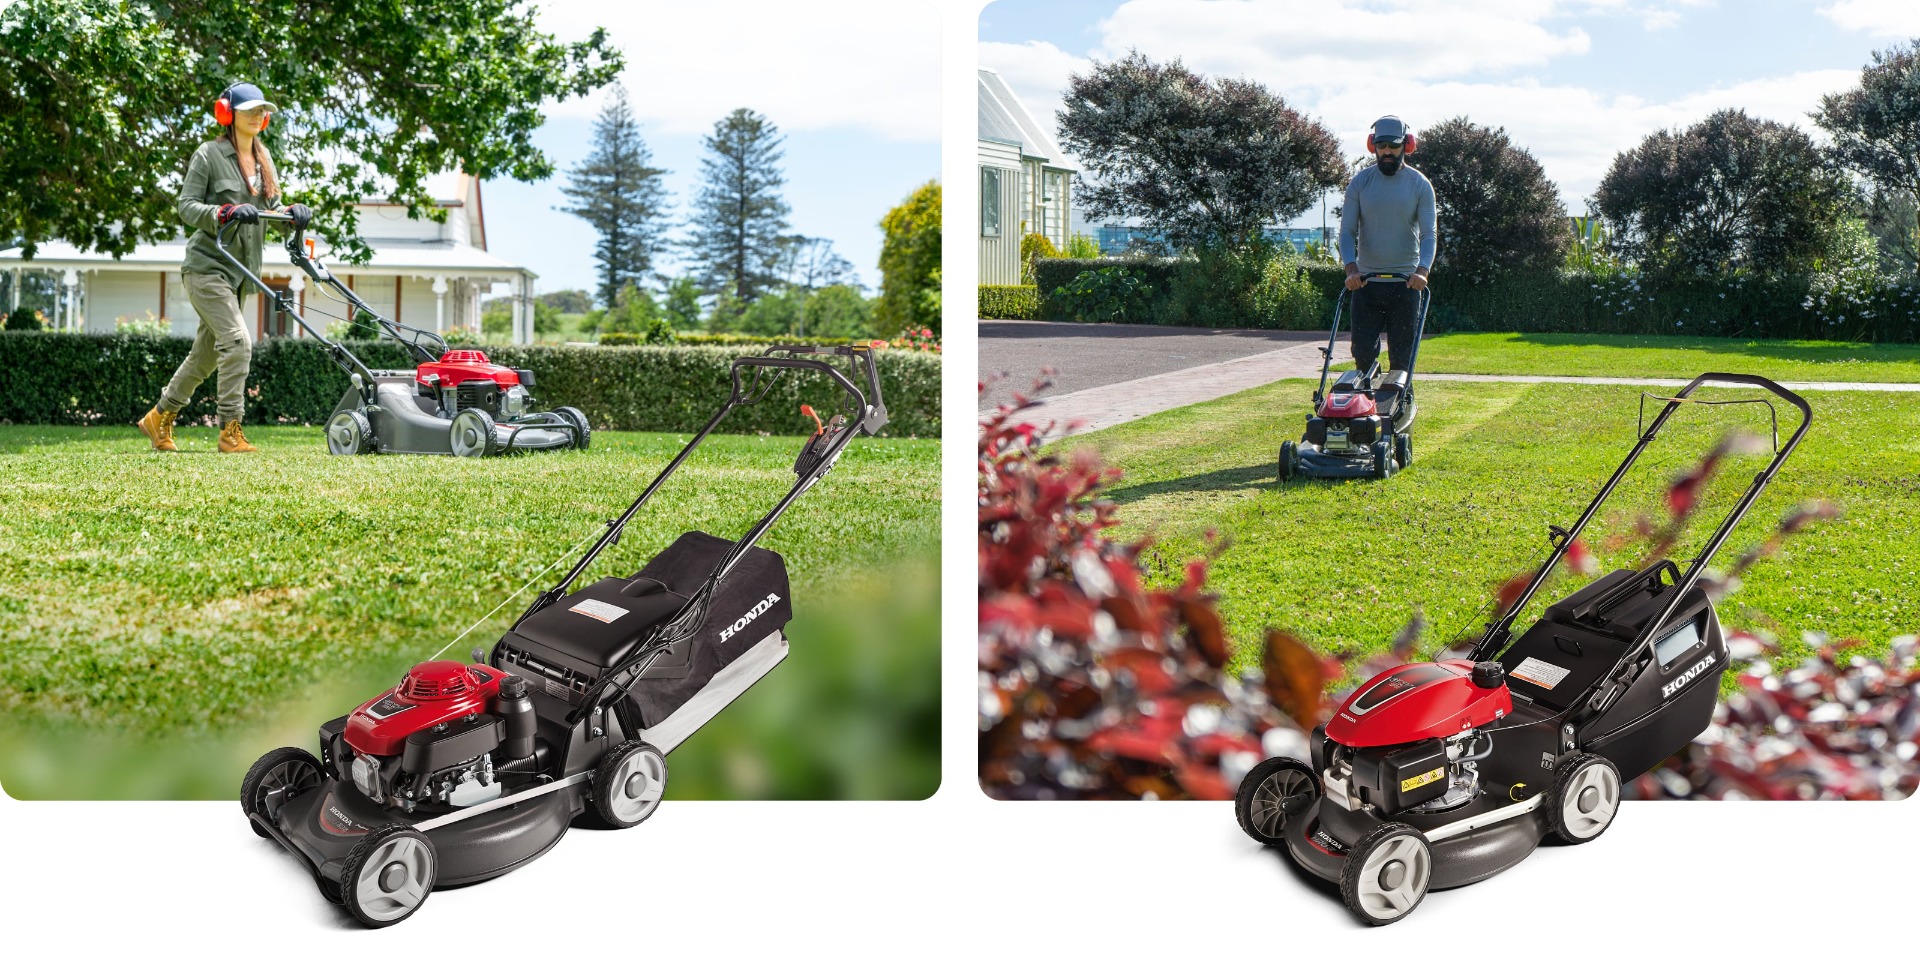 Lawn_Mowers_Learn_More_Page_Contractor_or_Home_User_3200_x_1600